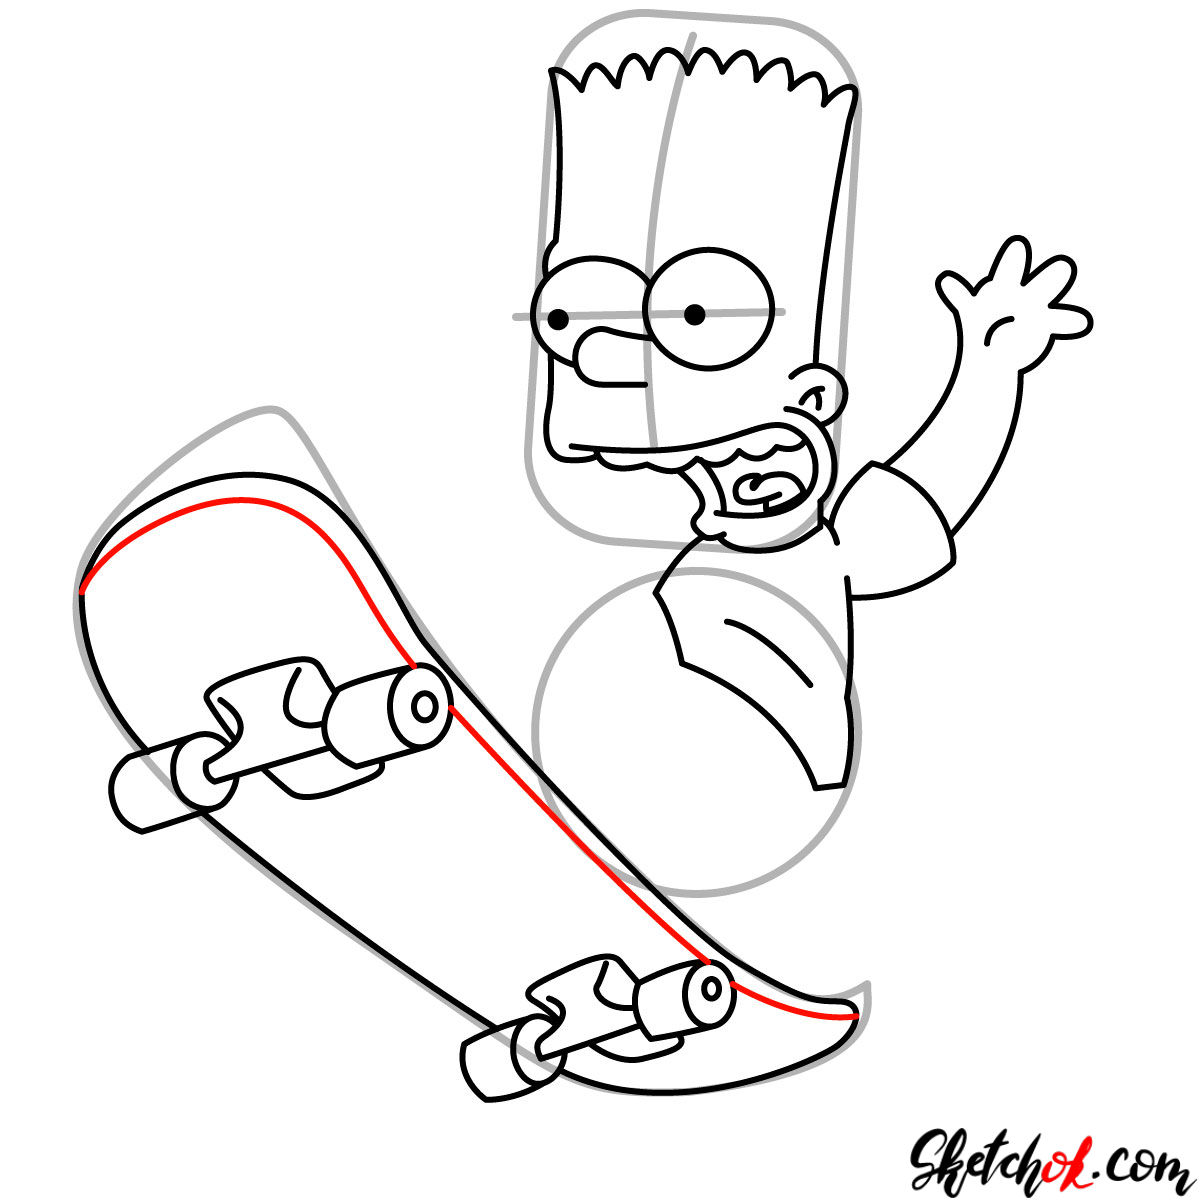 How to draw Bart Simpson on a skateboard - step 08